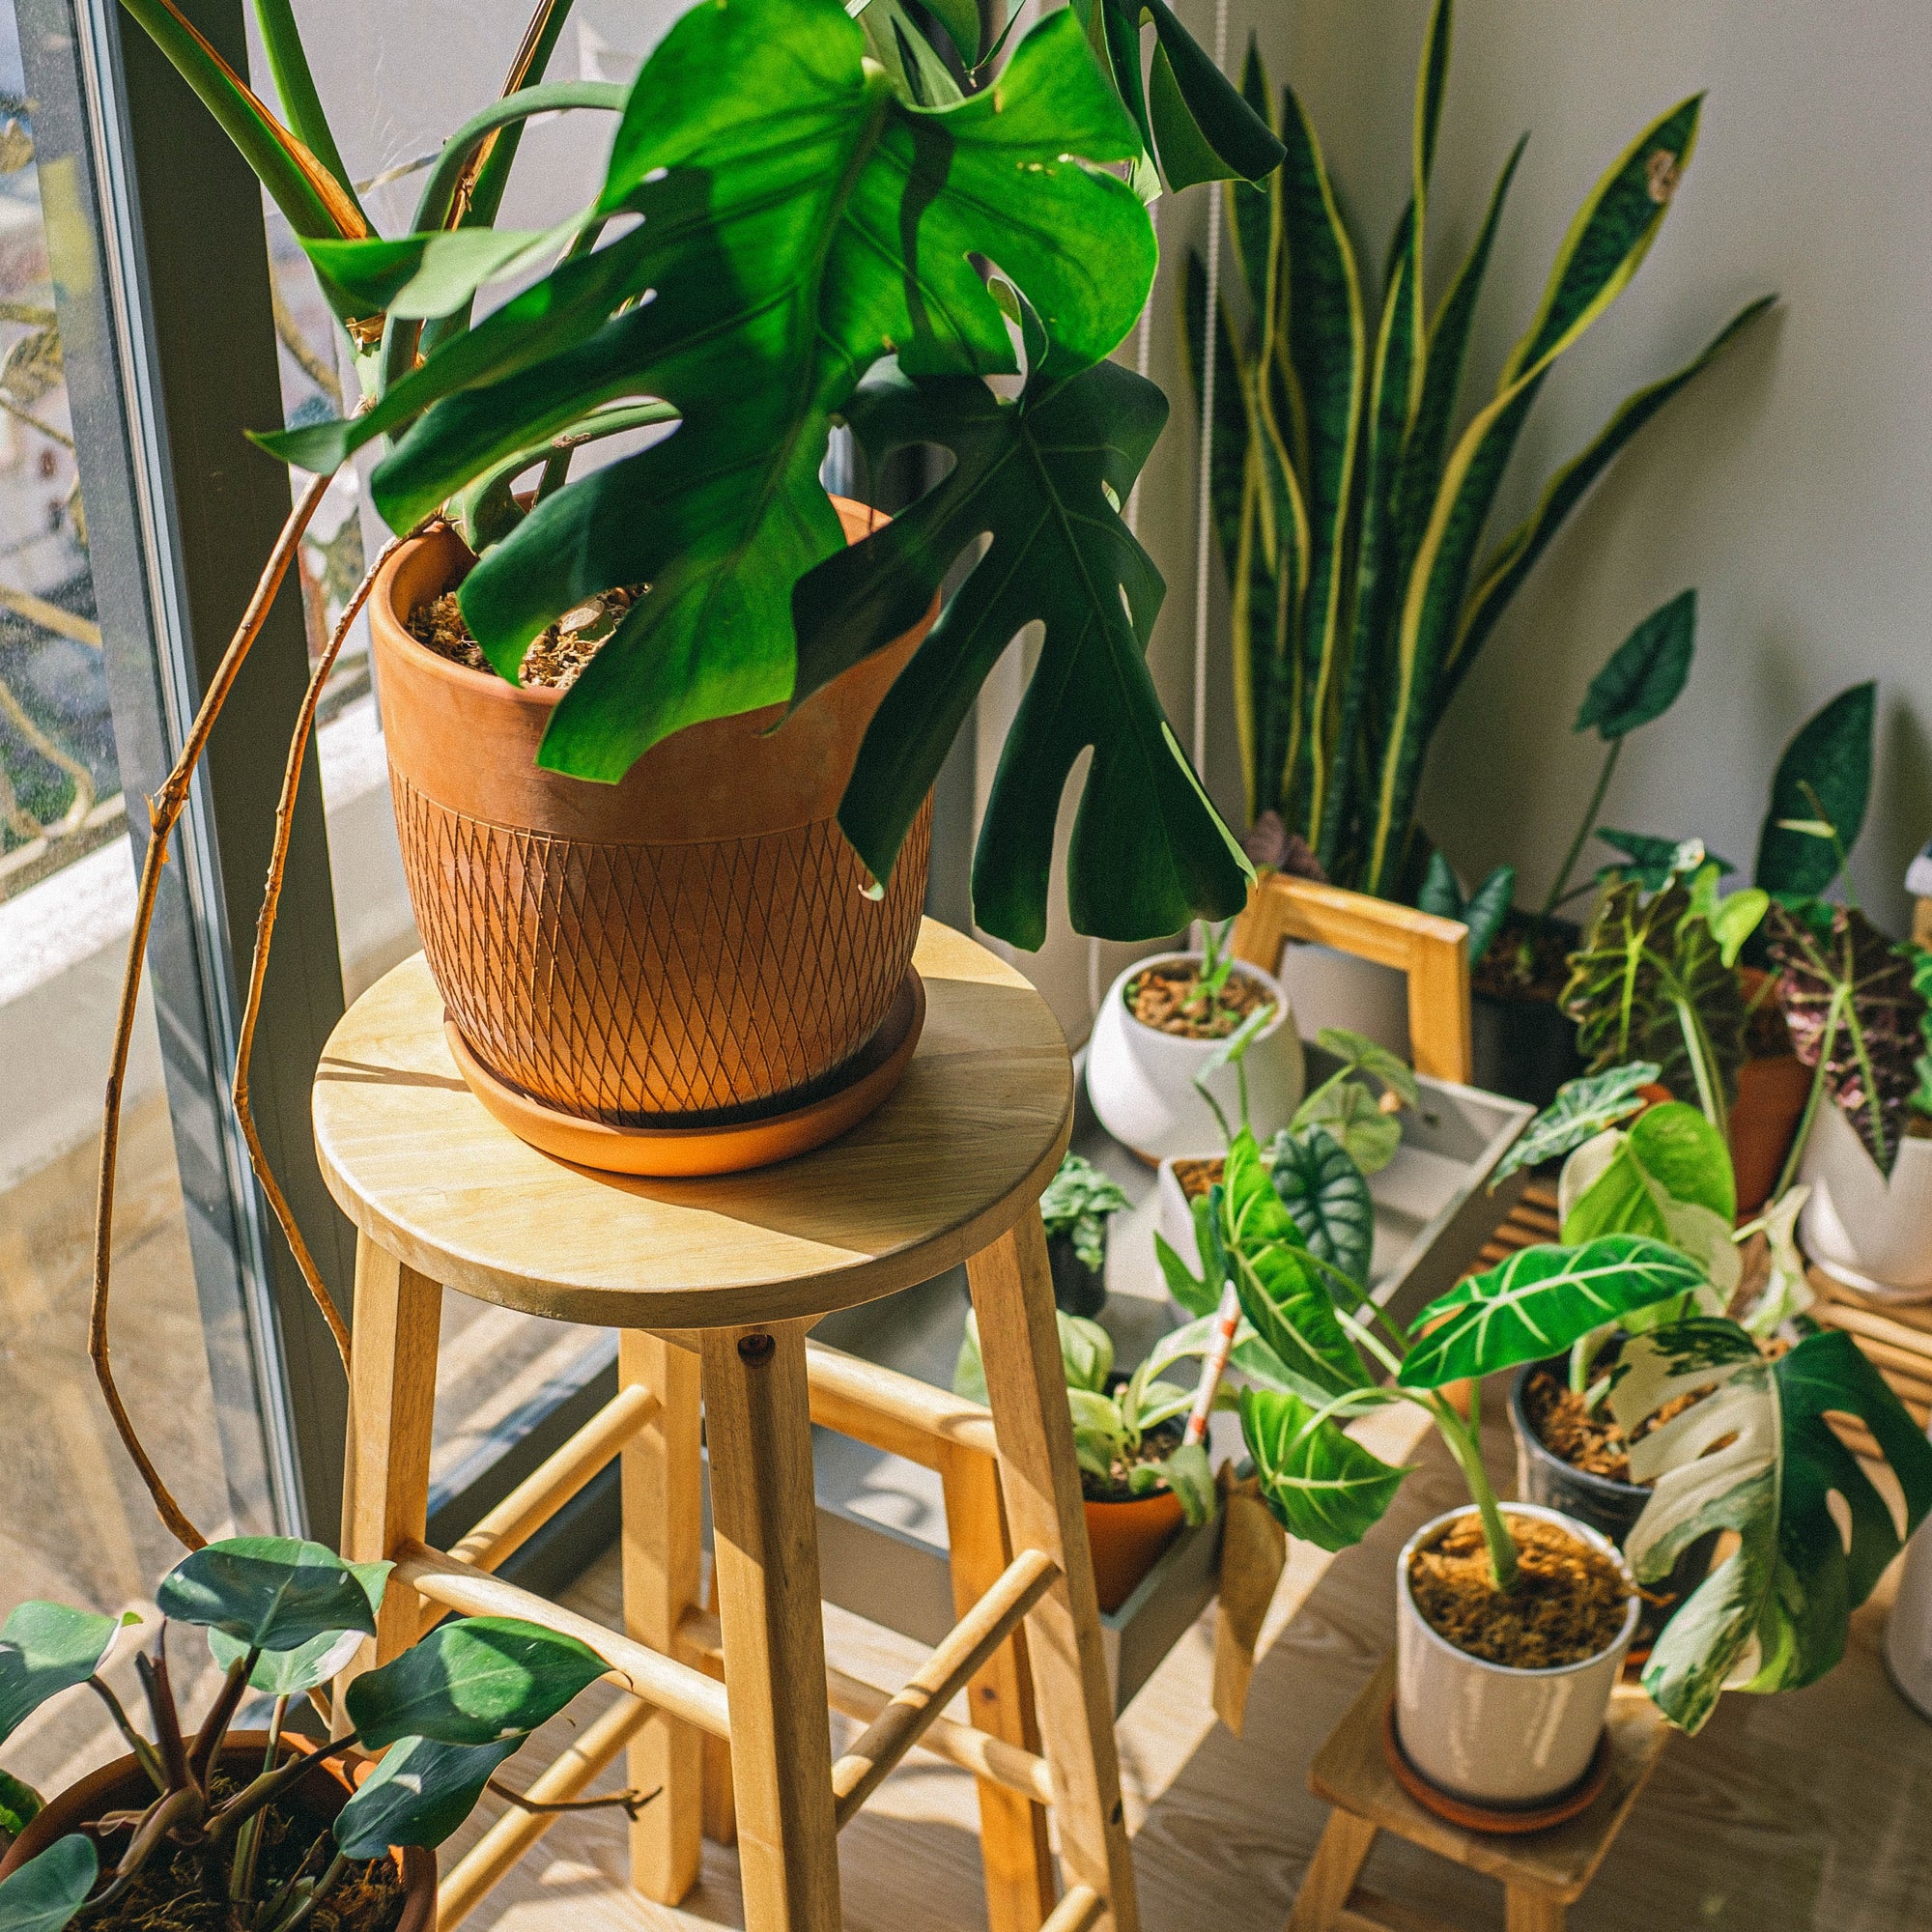 Winter Wonderland: A Comprehensive Guide to Nurturing Your House Plants During the Cold Season